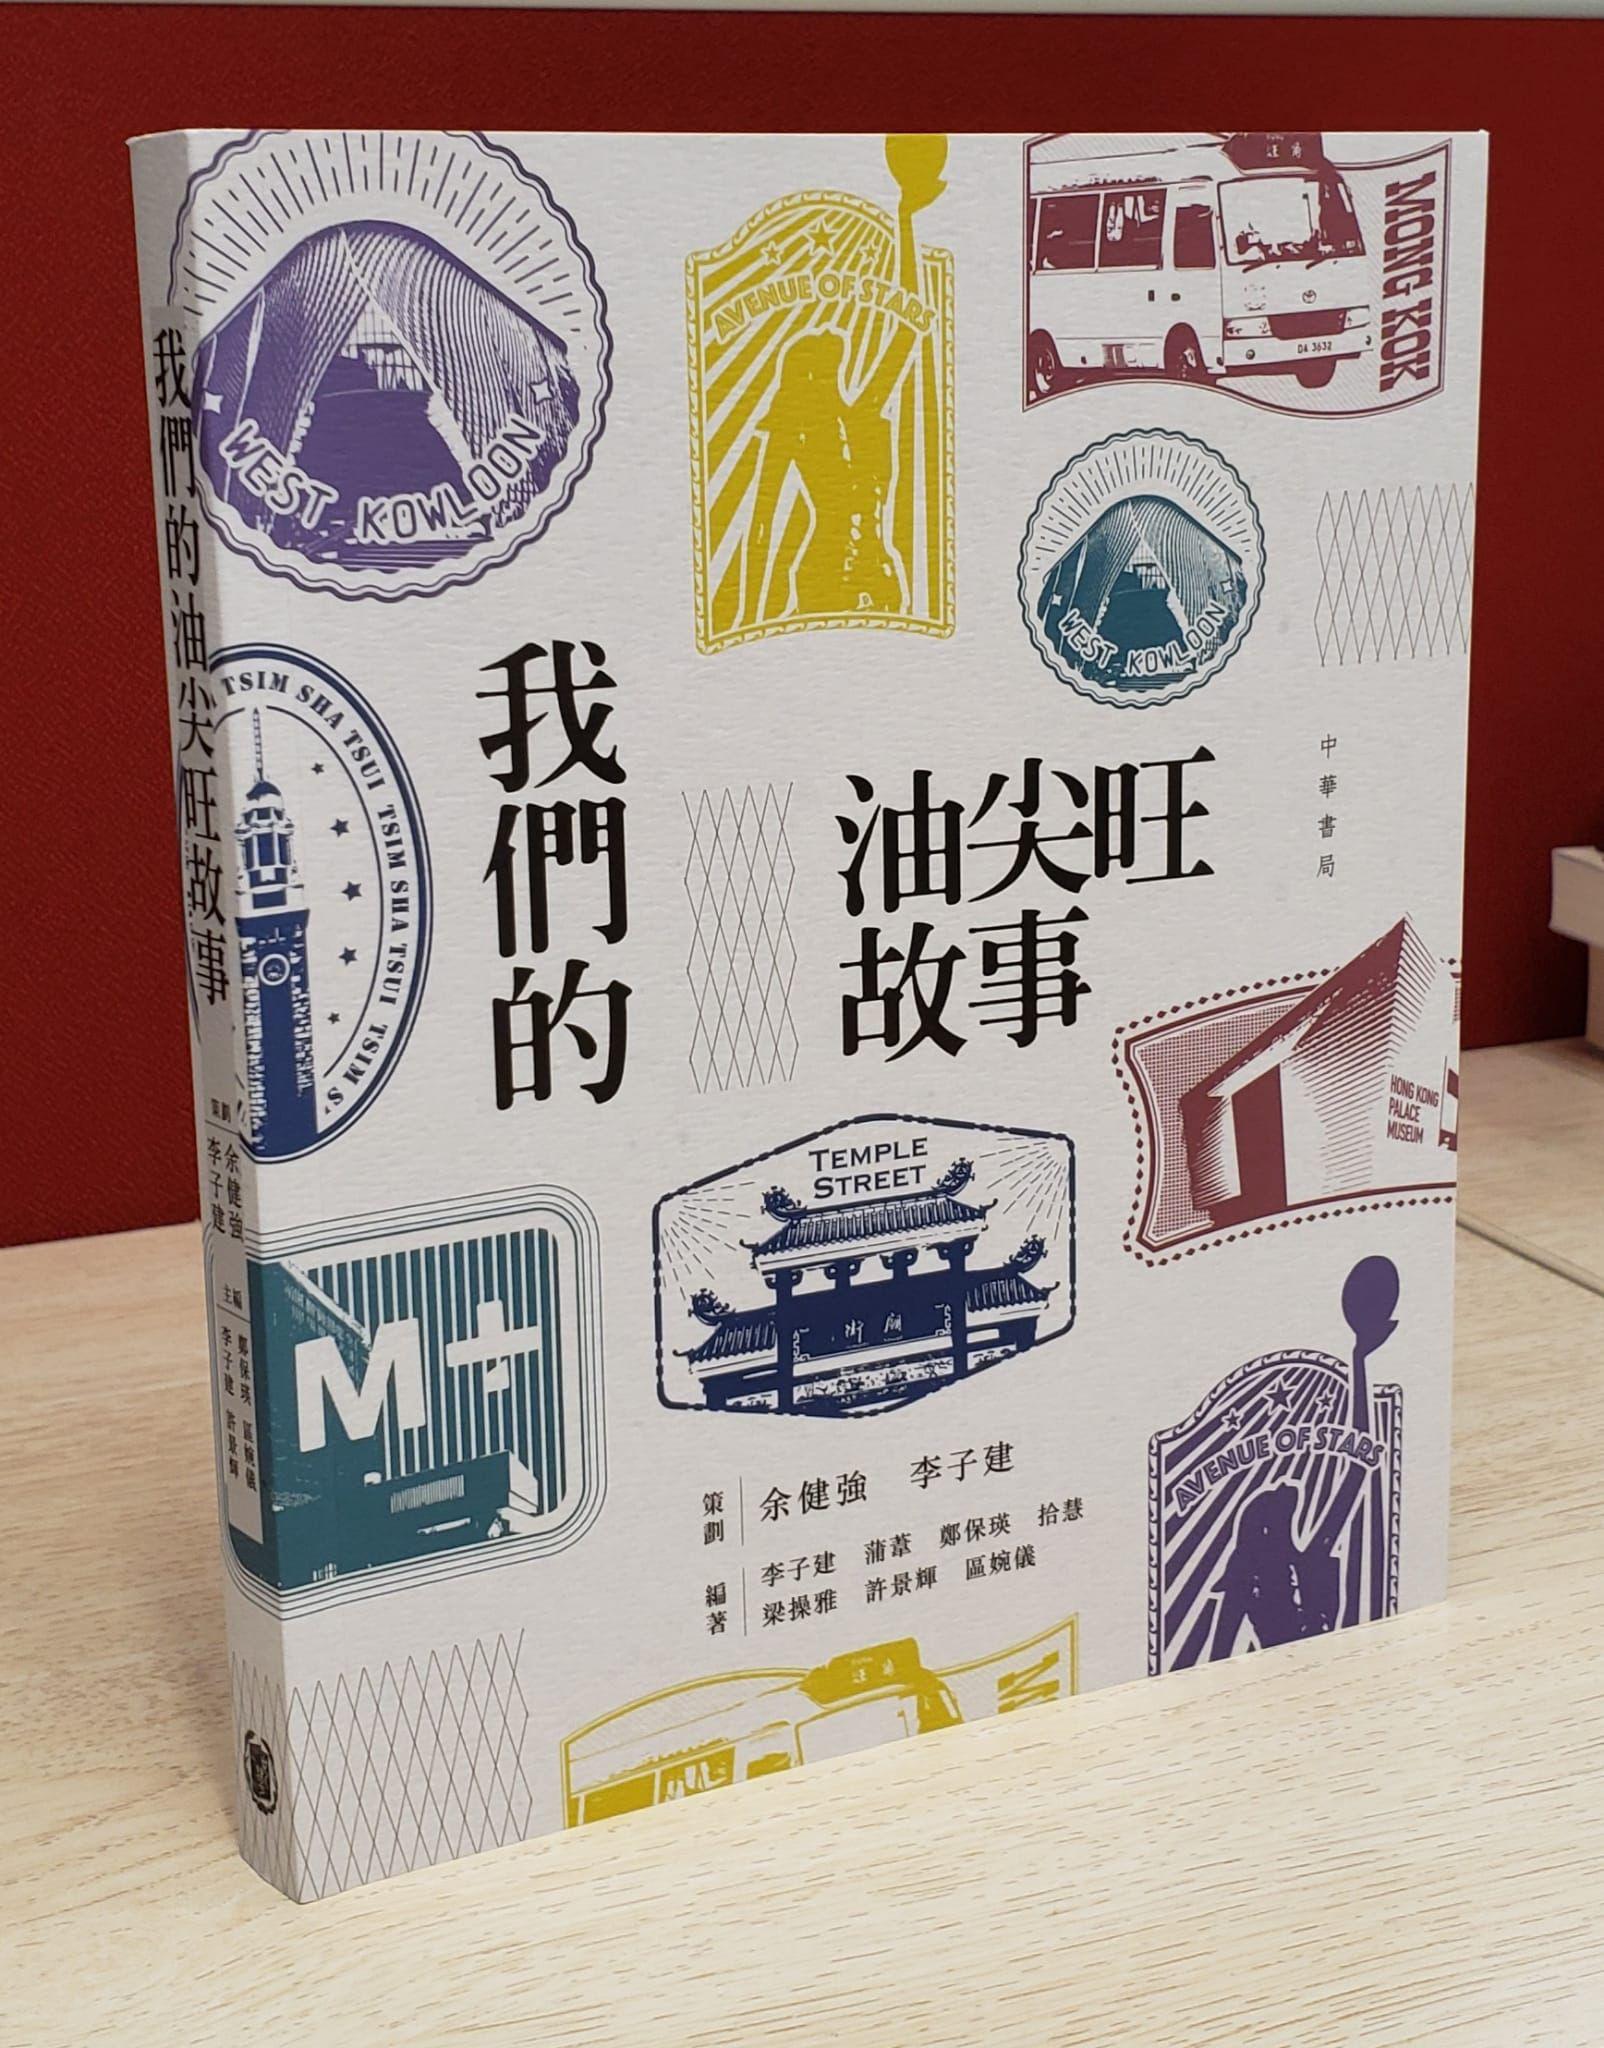 A new book, "Our Yau Tsim Mong Stories", which is jointly planned by the Yau Tsim Mong District Office and the team of Professor Lee Chi-kin of the Education University of Hong Kong, and published by Chung Hwa Book Company, has been launched. Photo shows the book cover of "Our Yau Tsim Mong Stories".